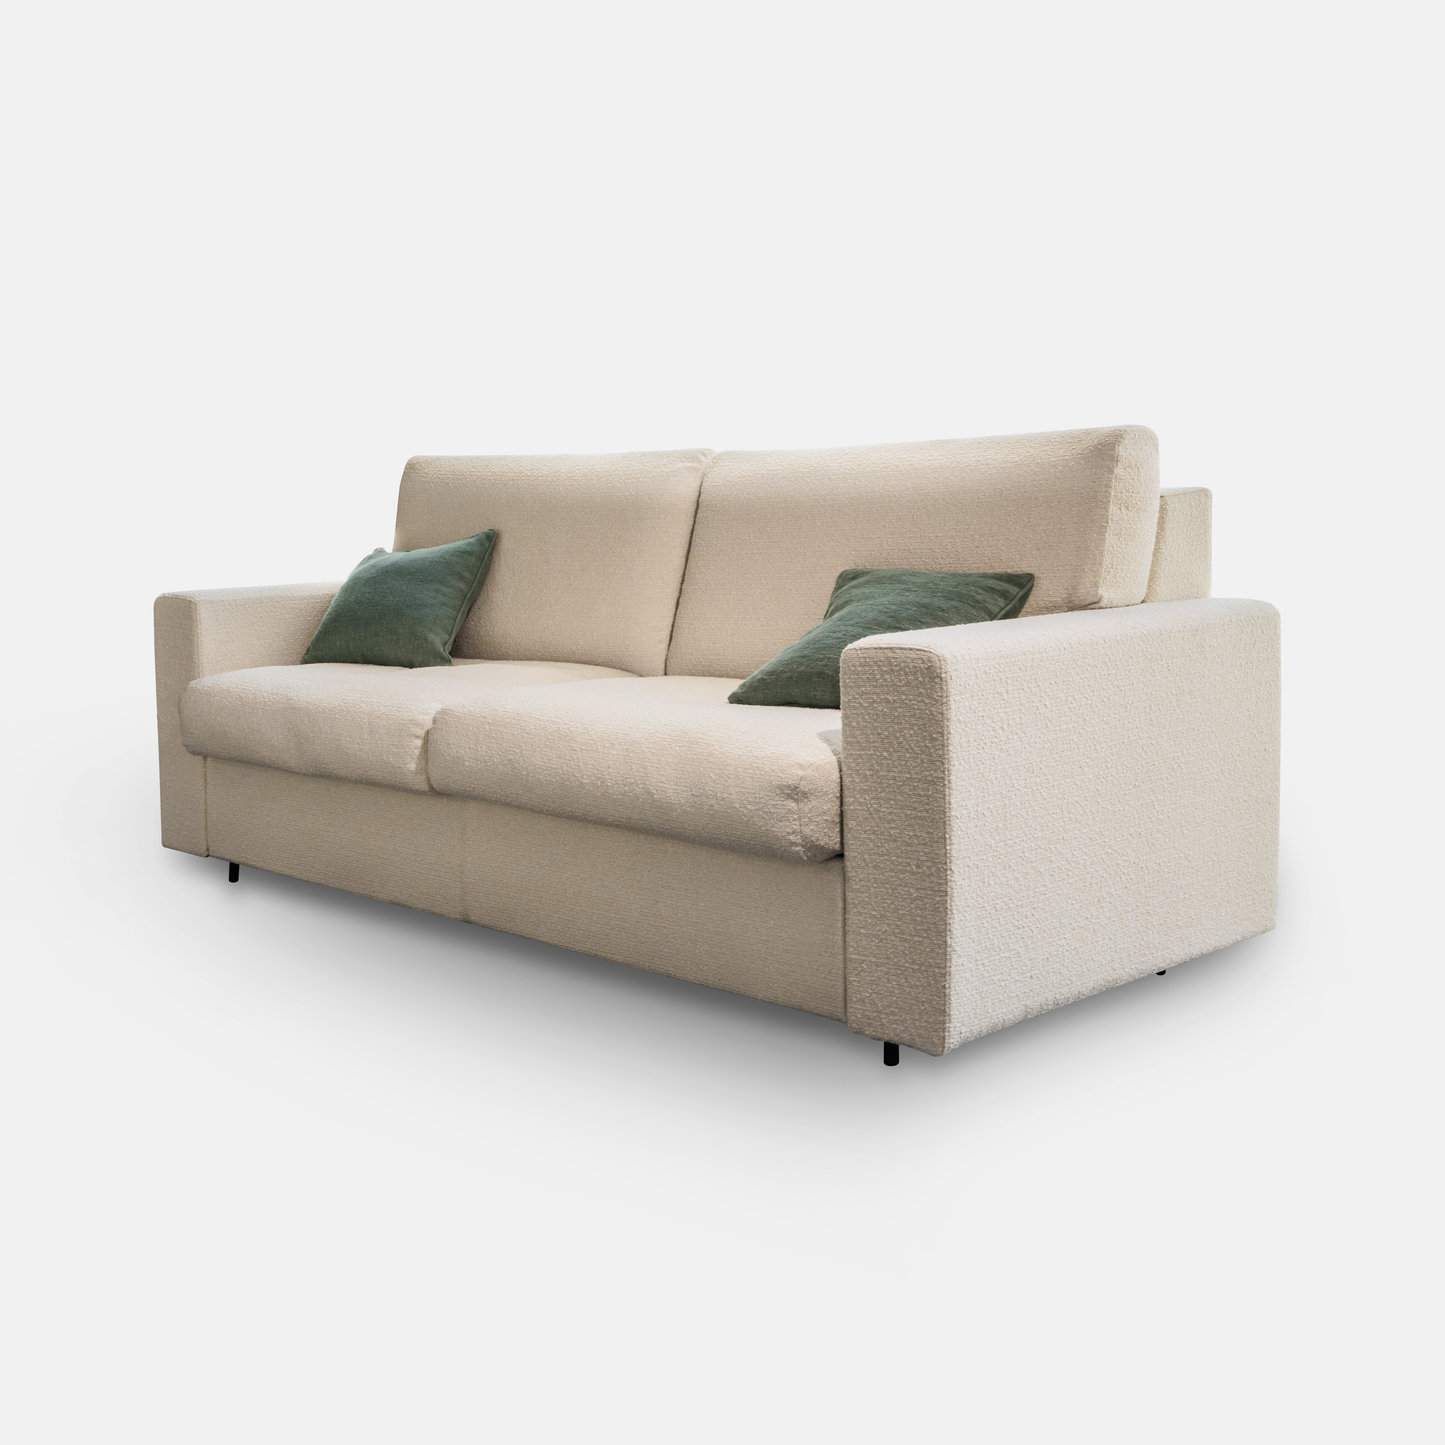 Sofabed New York Double